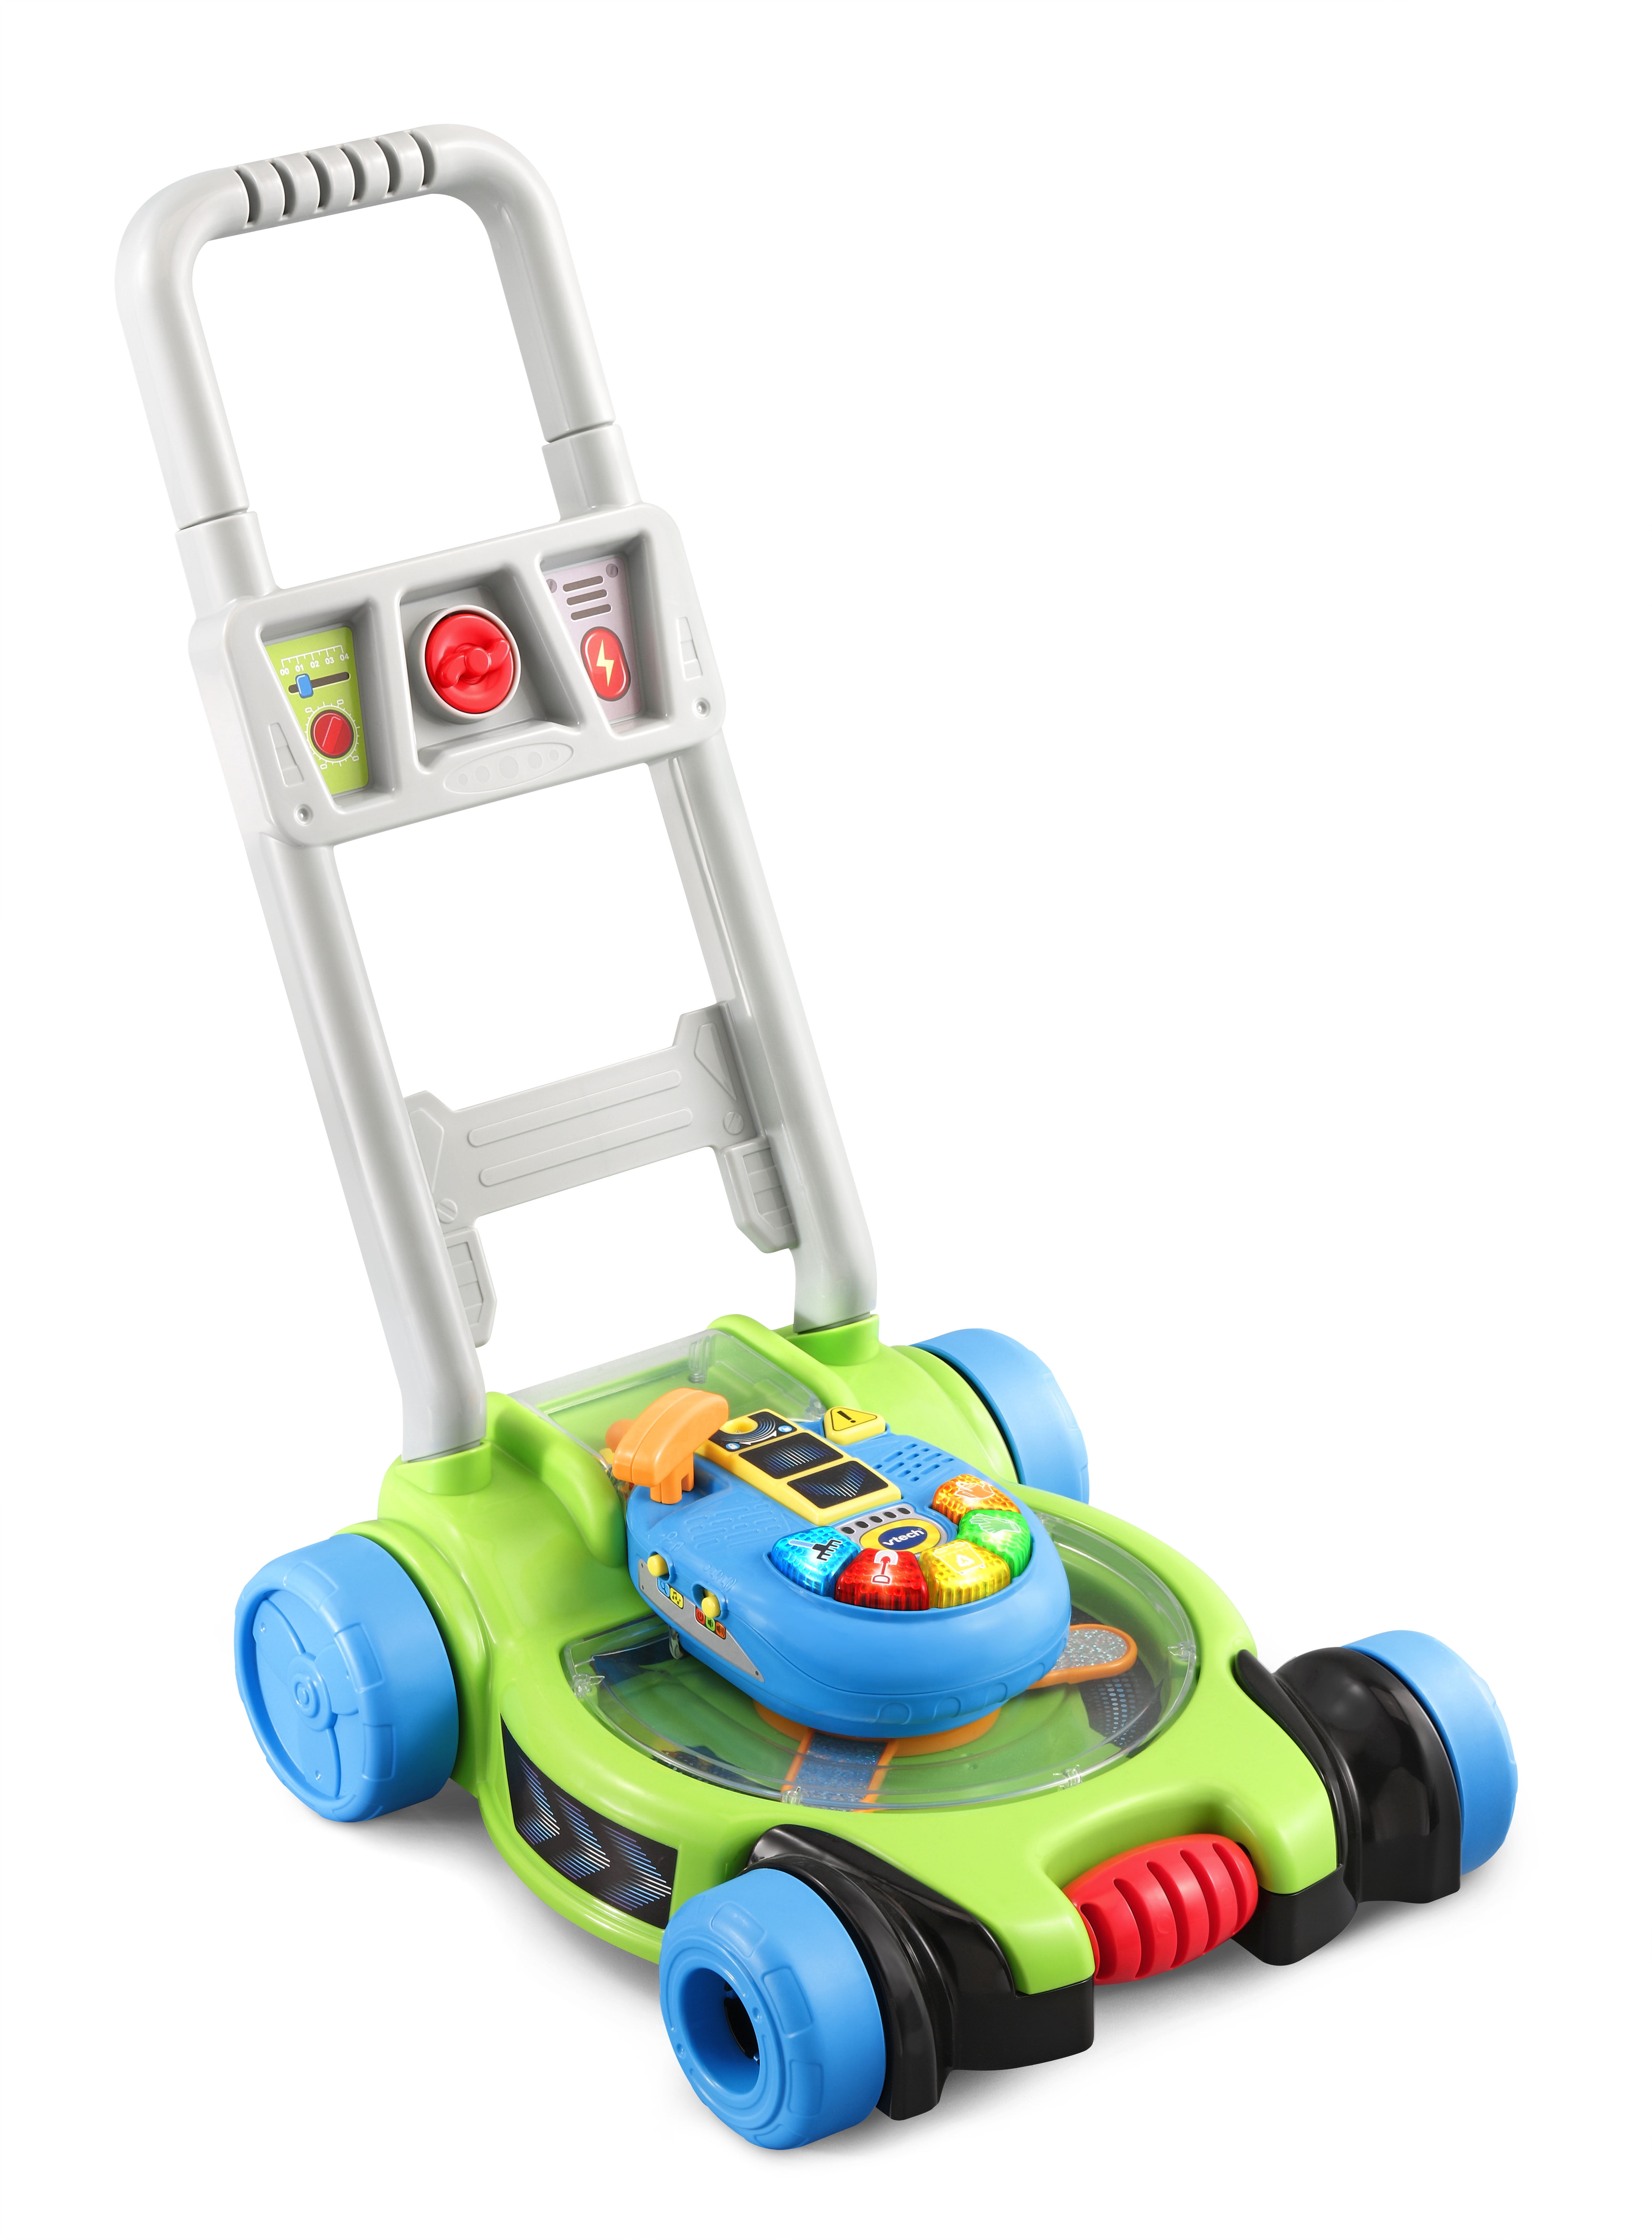 Pop and Spin Mower Role-Play Lawn Mower, VTech